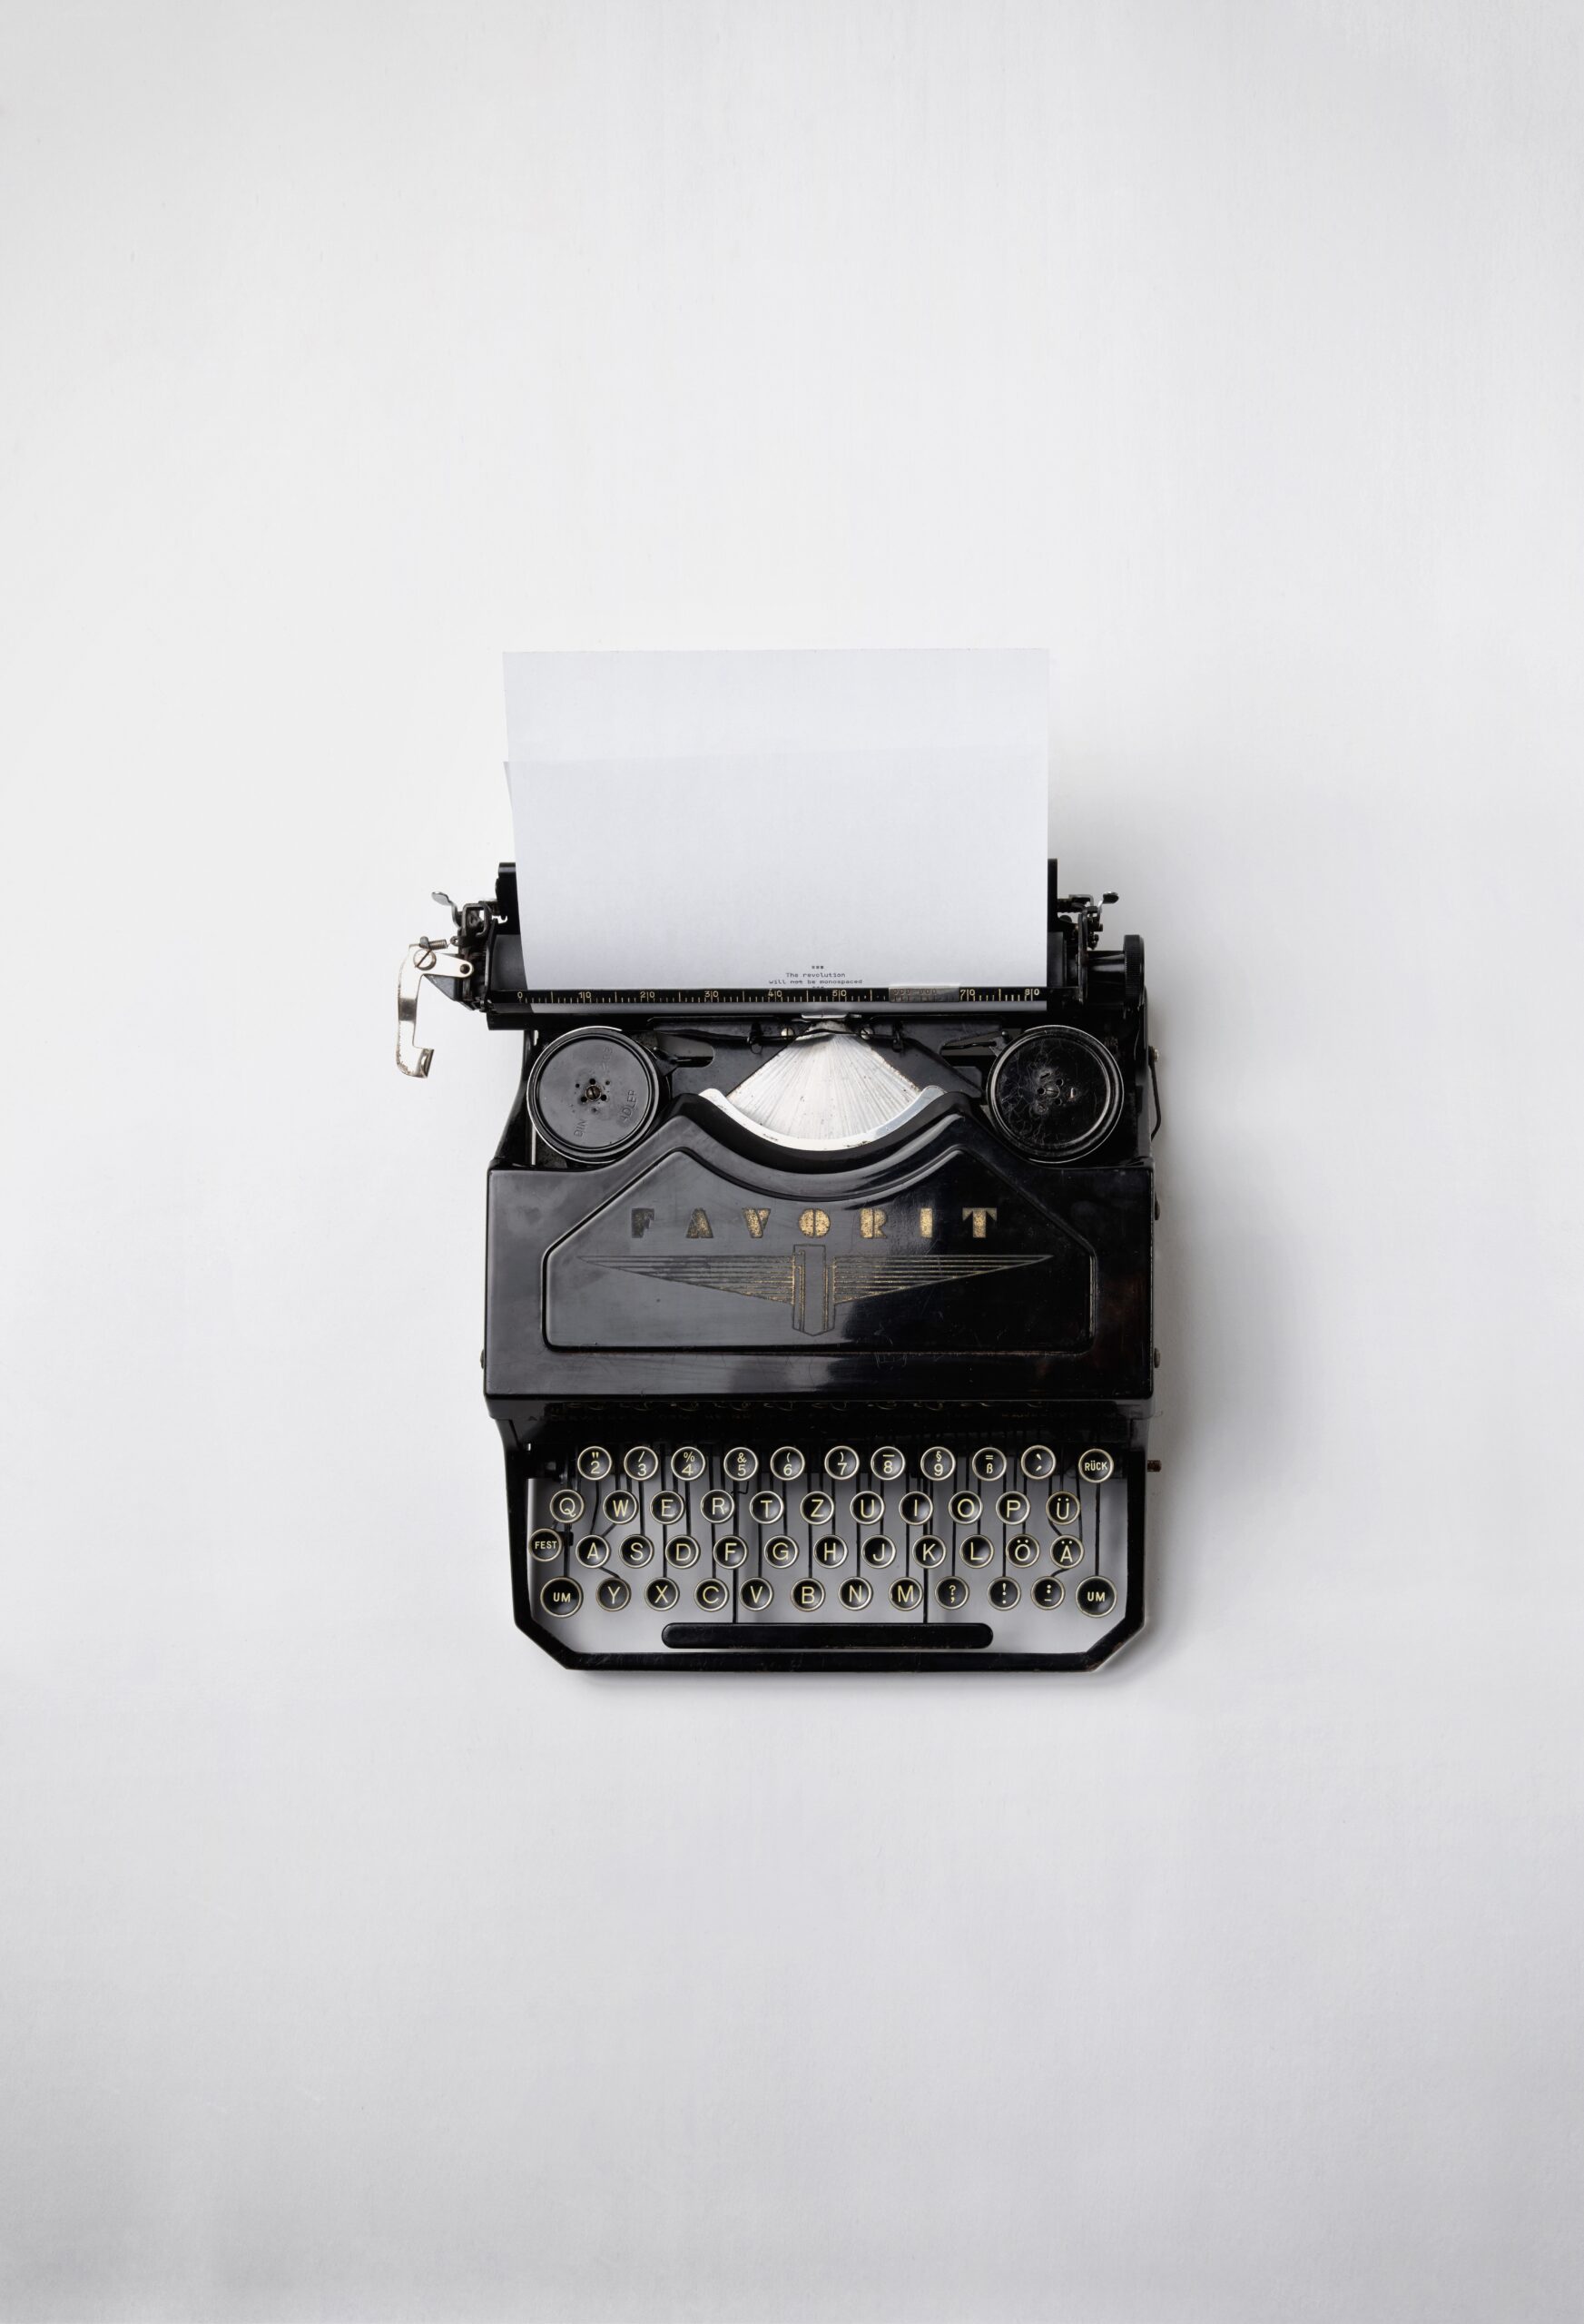 Does your email copy persuade or sell? black typewriter on white background